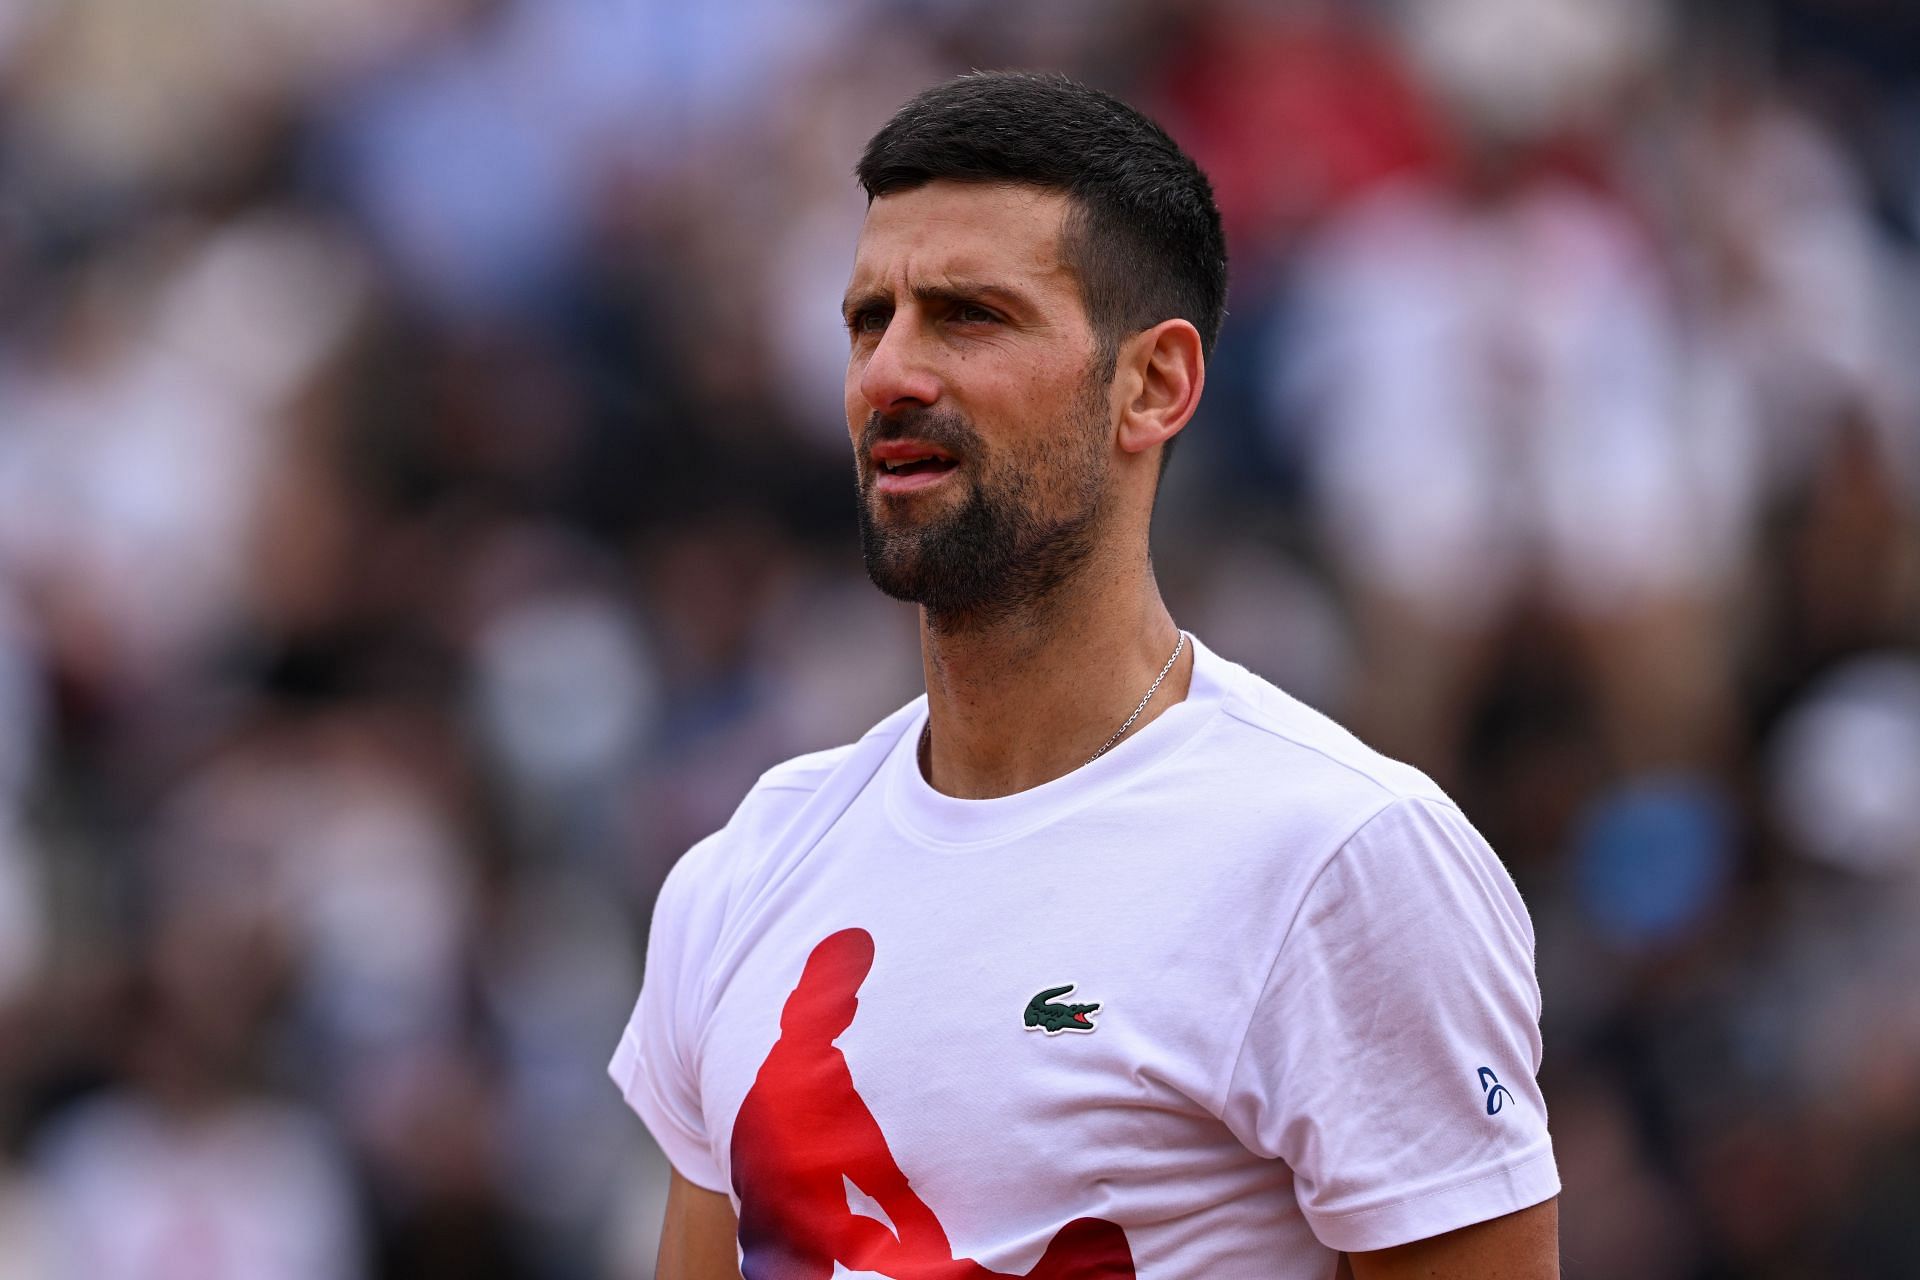 Novak Djokovic injury update: Serb undergoes scans for head injury sustained at Italian Open, reportedly given all clear